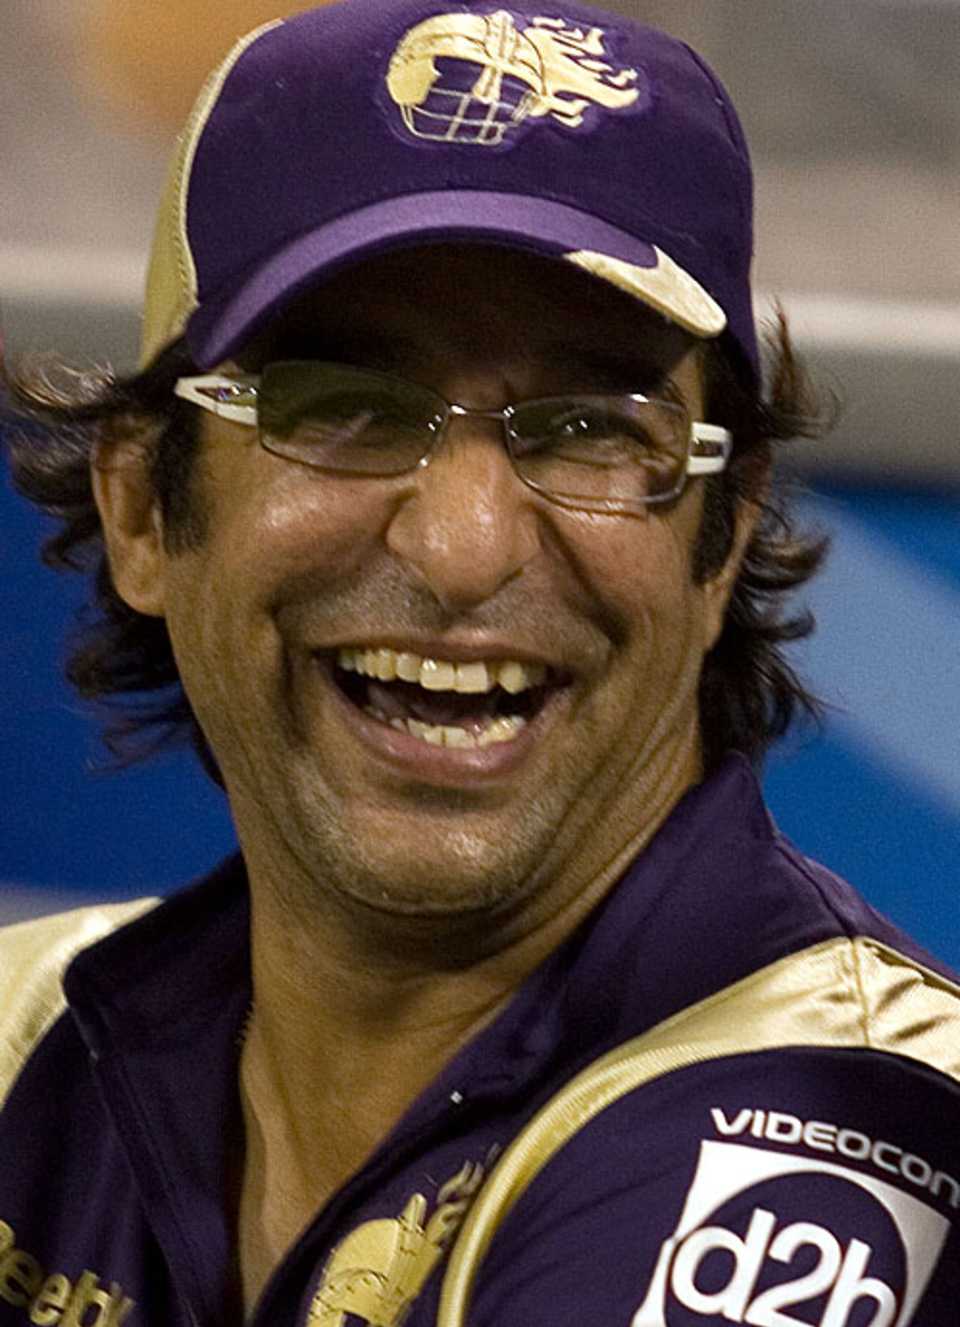 Wasim Akram relaxes in the dugout 